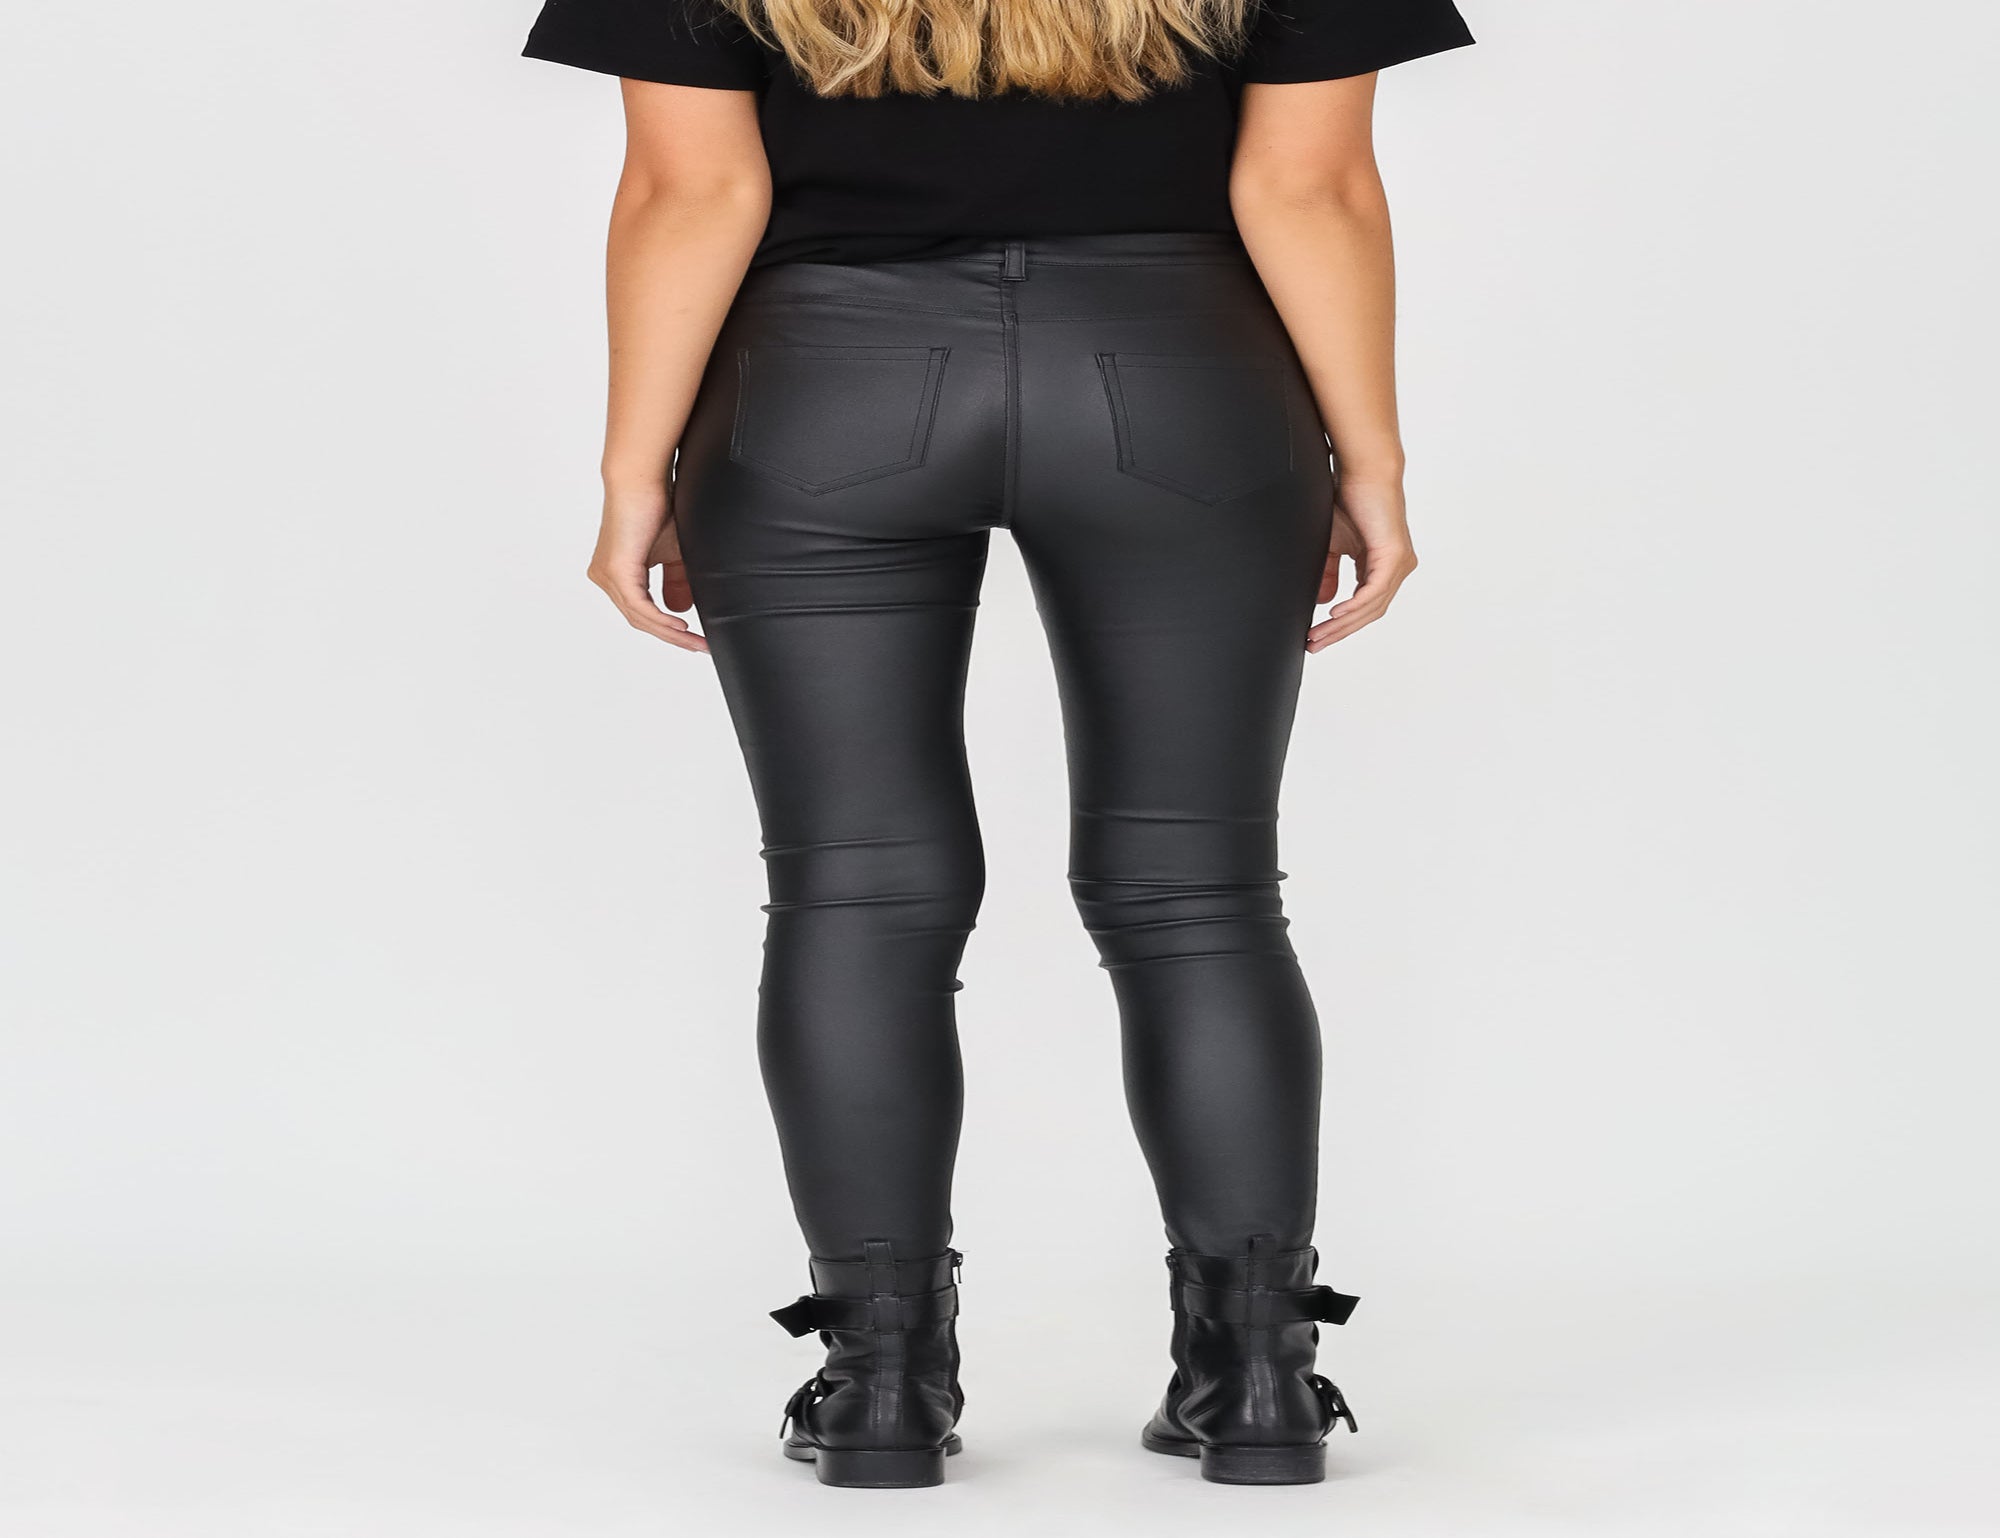 High Leather Look Pant - Black Pants - Full Length - Women's Clothing -